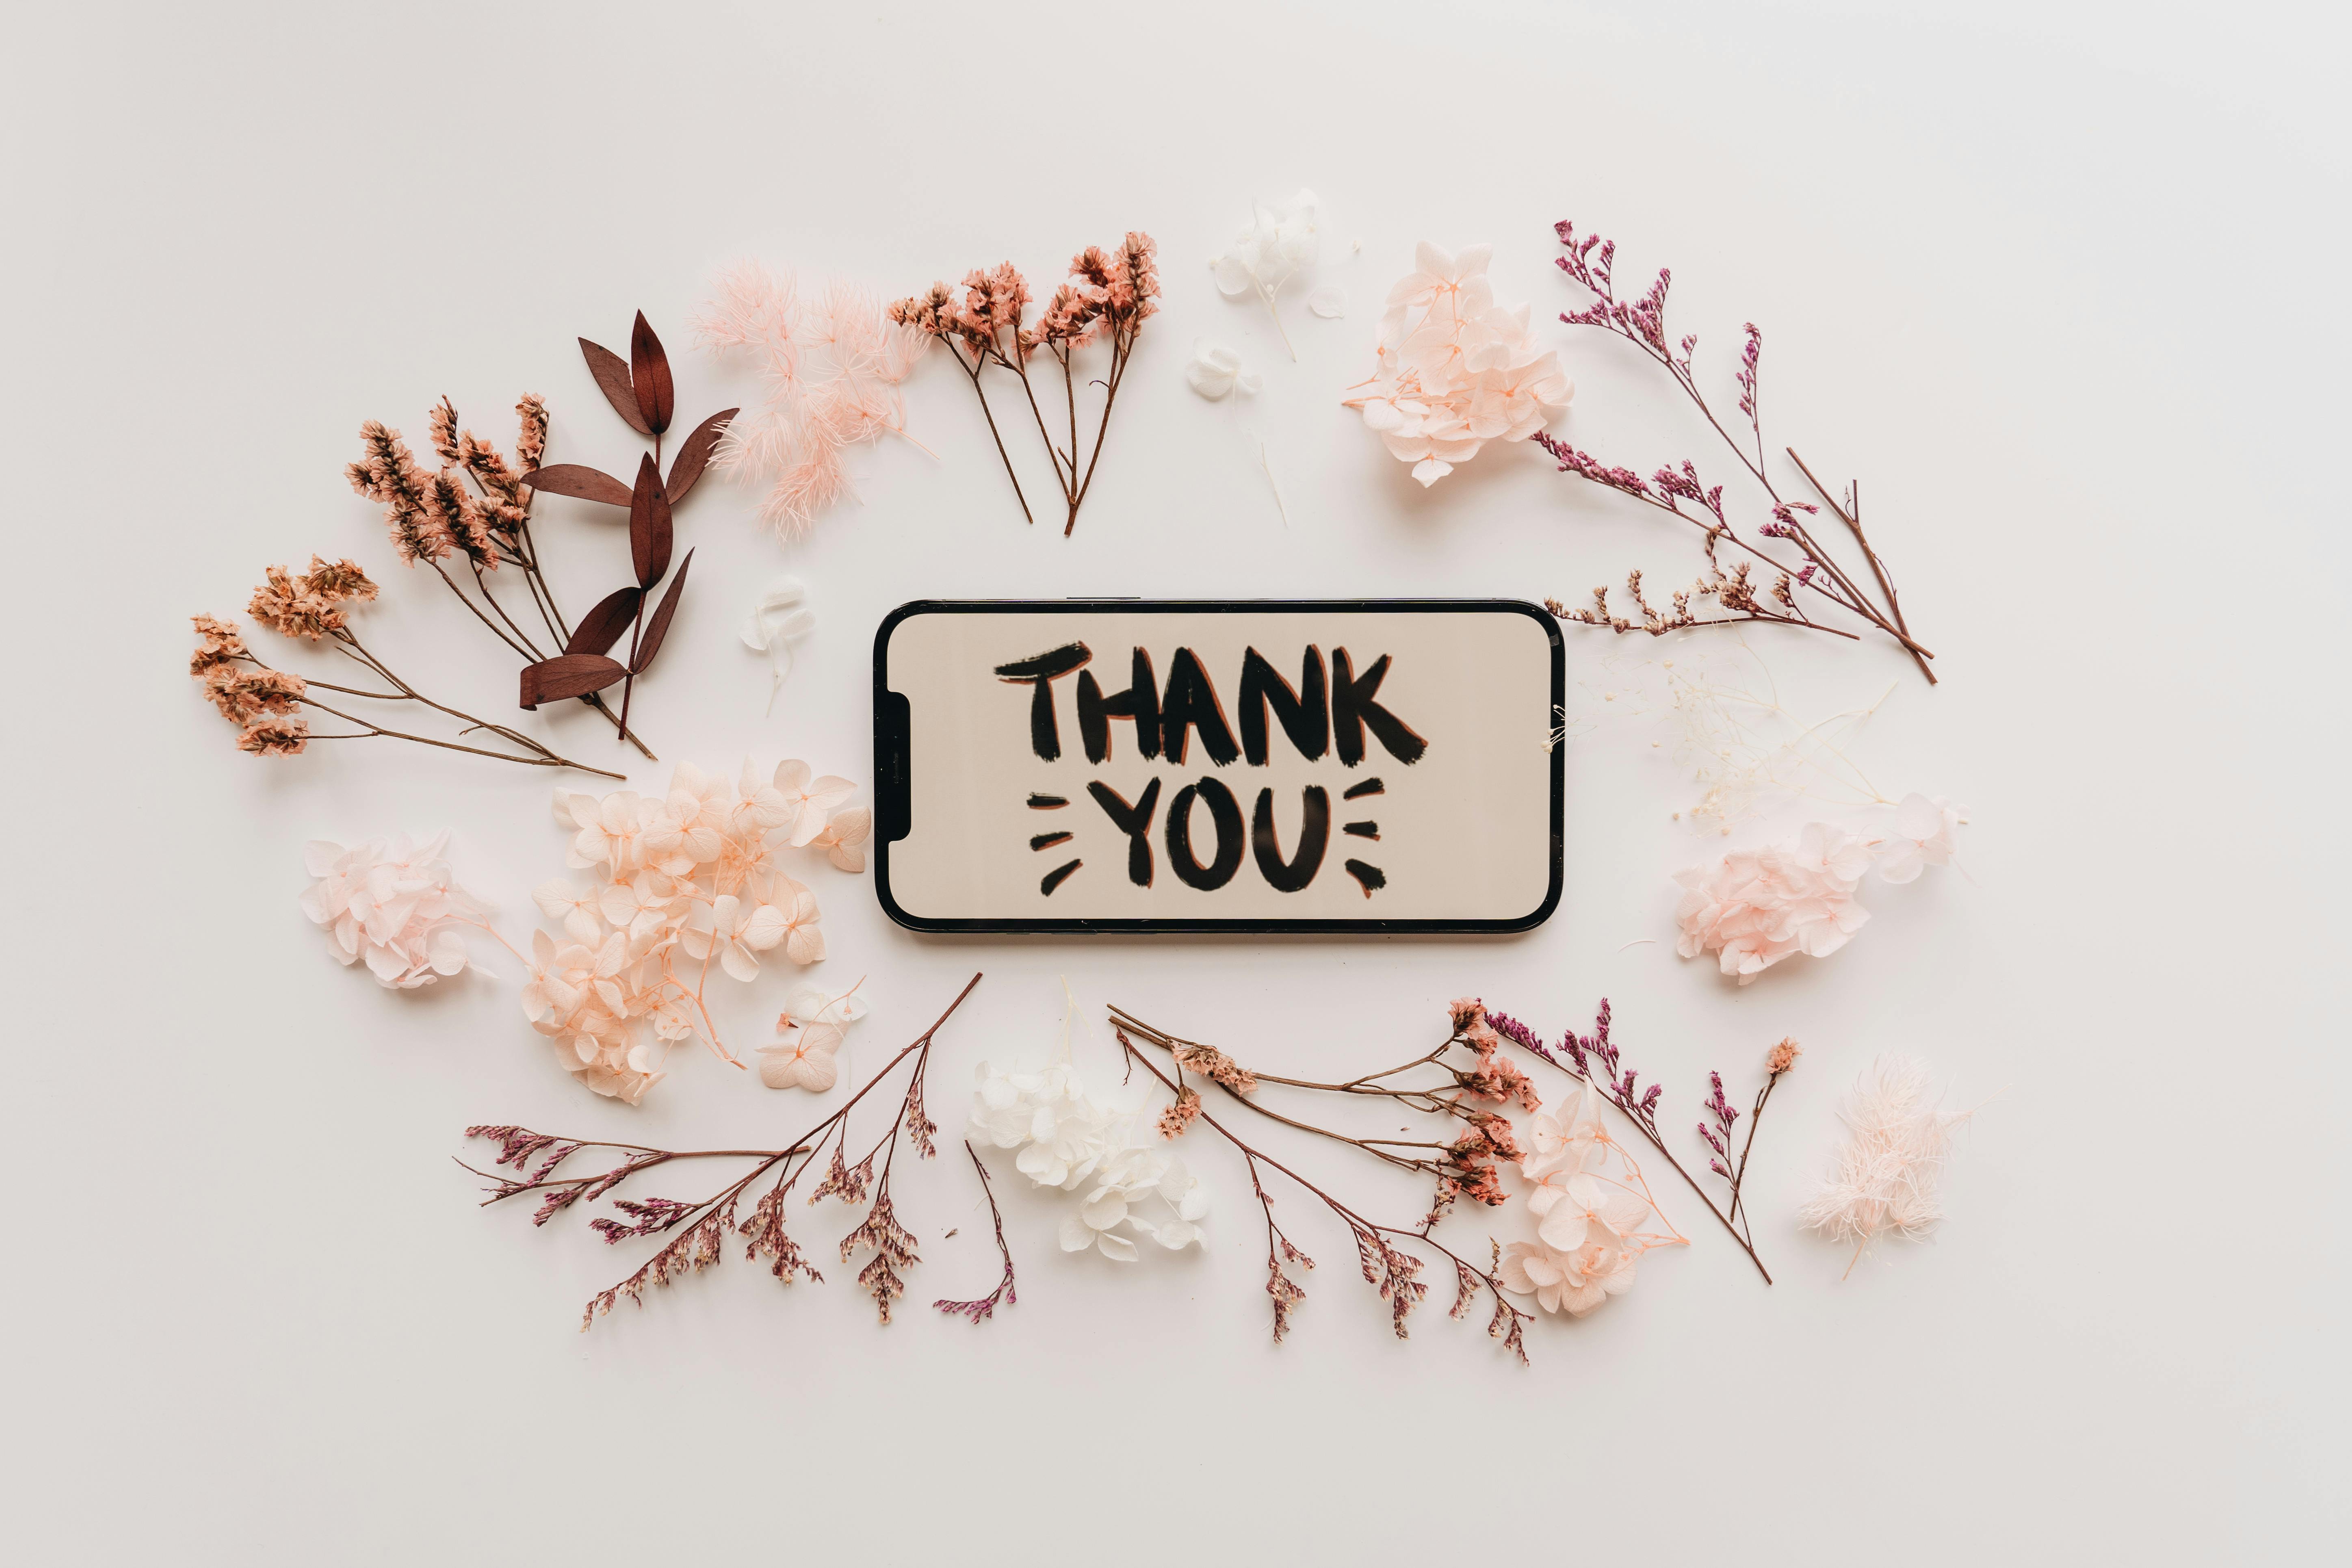 1000 Best Thank You Images  100 Free Download  Pexels Stock Photos